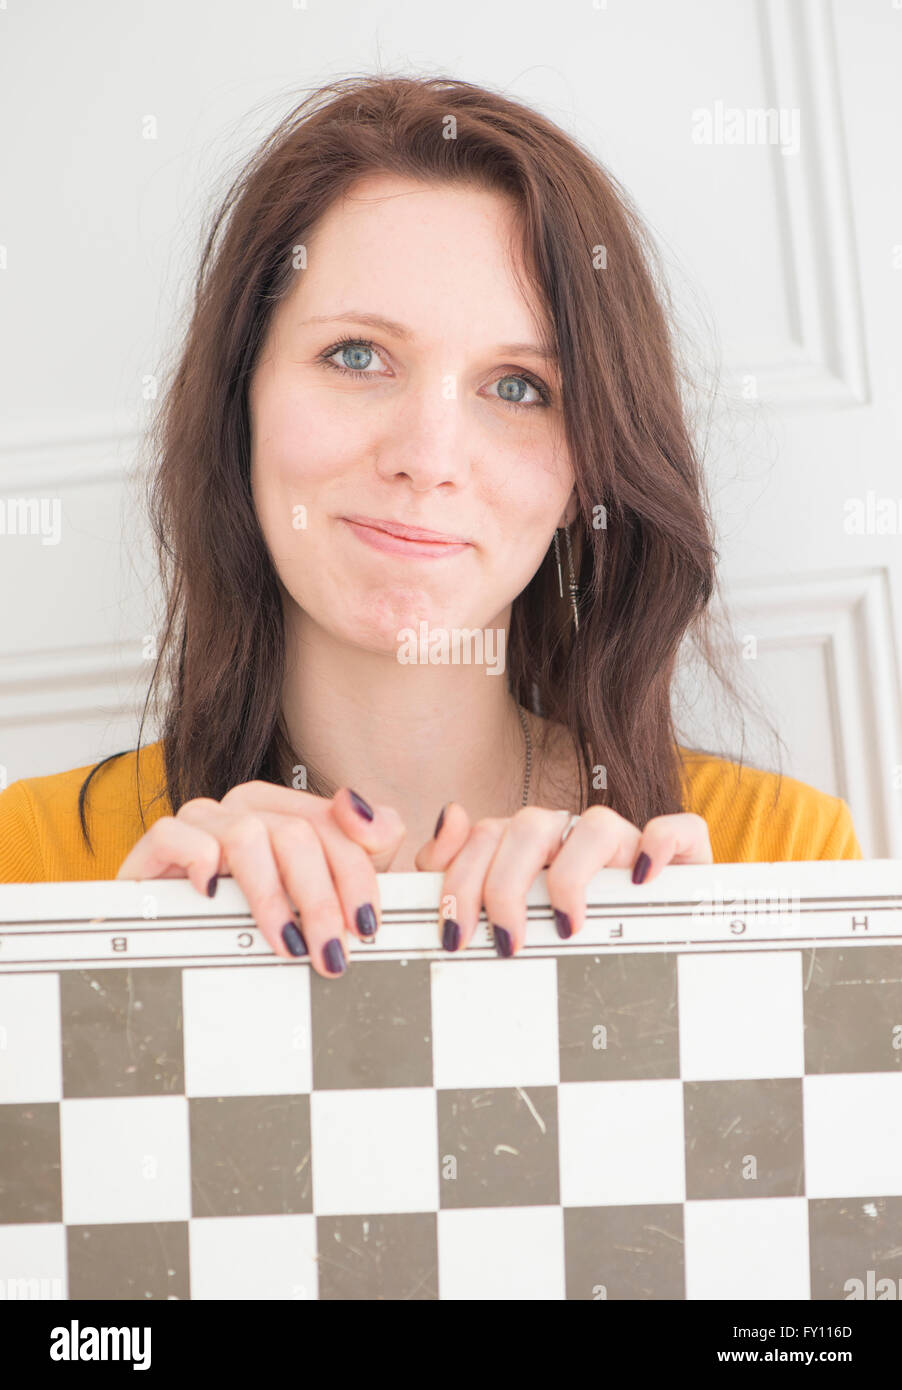 Smiling woman holding chessboard in home interior. Concept of strategy, leisure activity and playing games. Stock Photo